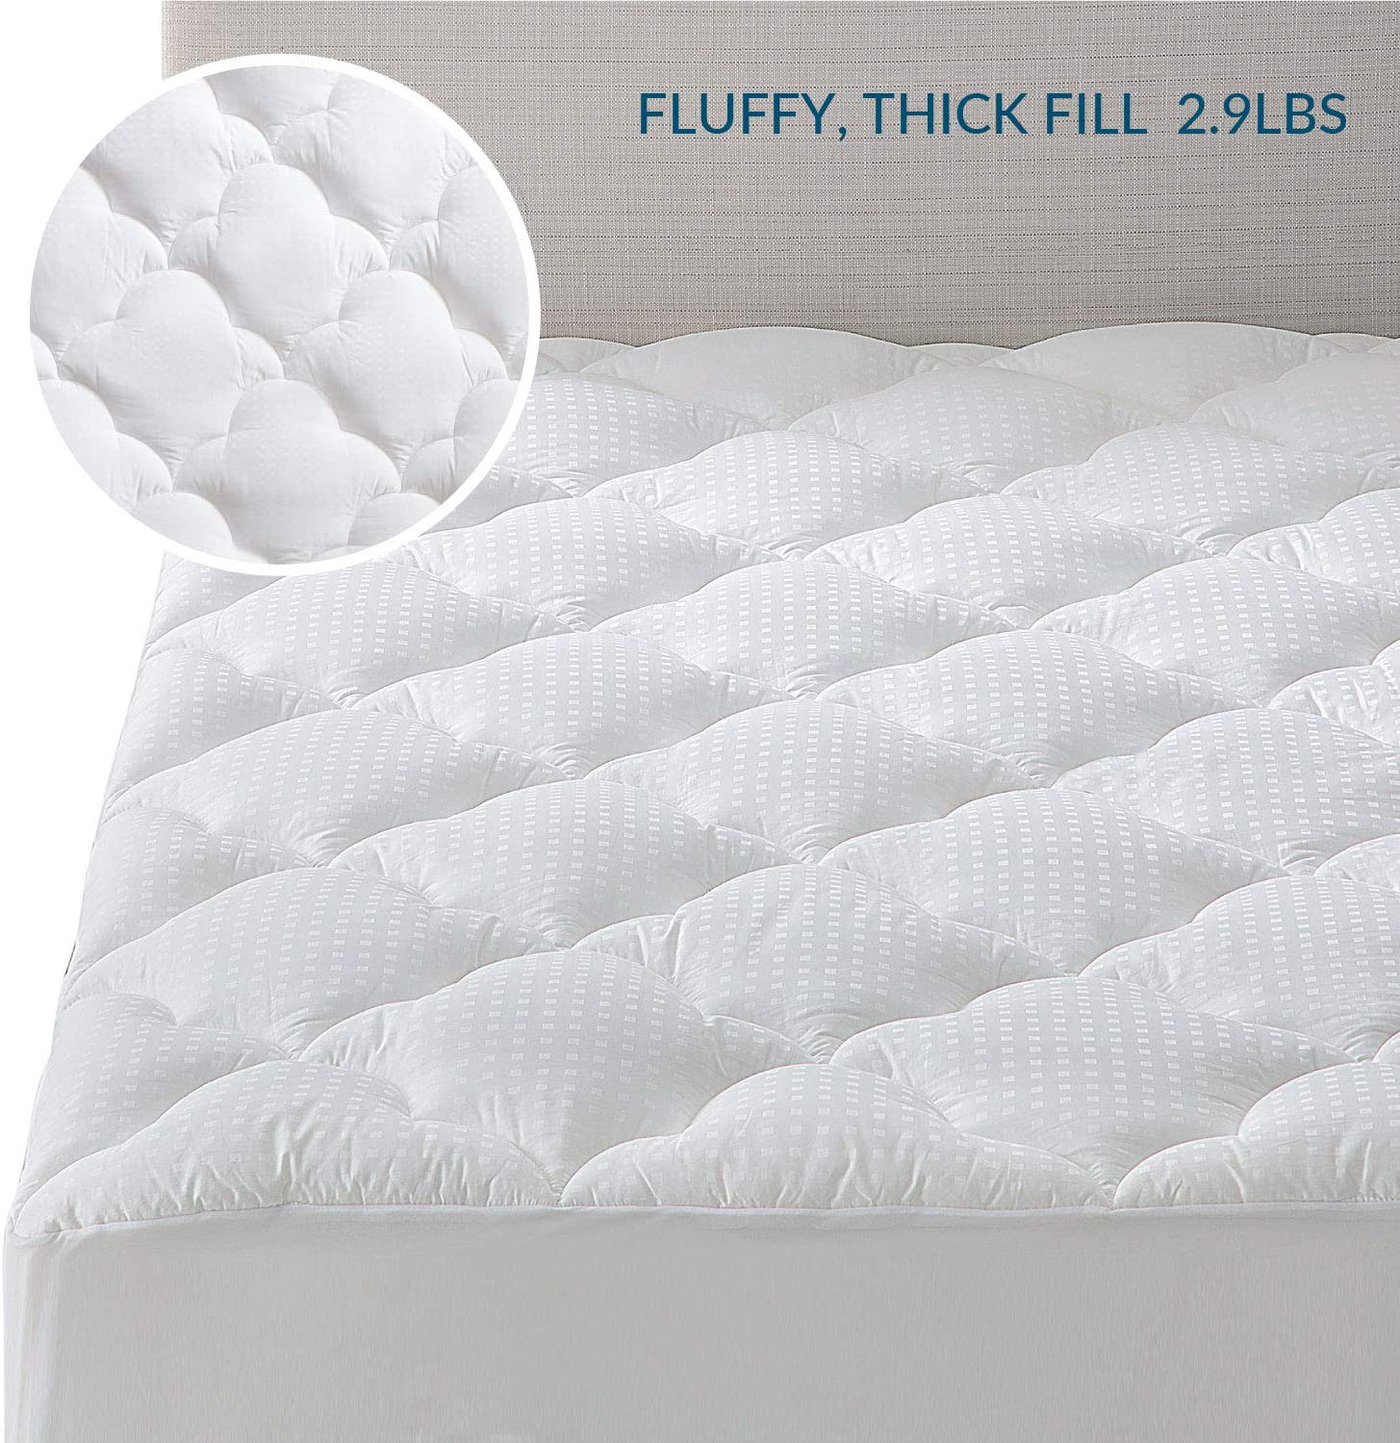 Bedsure Twin Mattress Topper - Cotton Mattress Pad Pillow Top Cooling Quilted Mattress Cover with Deep Pocket, Single Padded PillowTop with Fluffy Down Alternative Fill